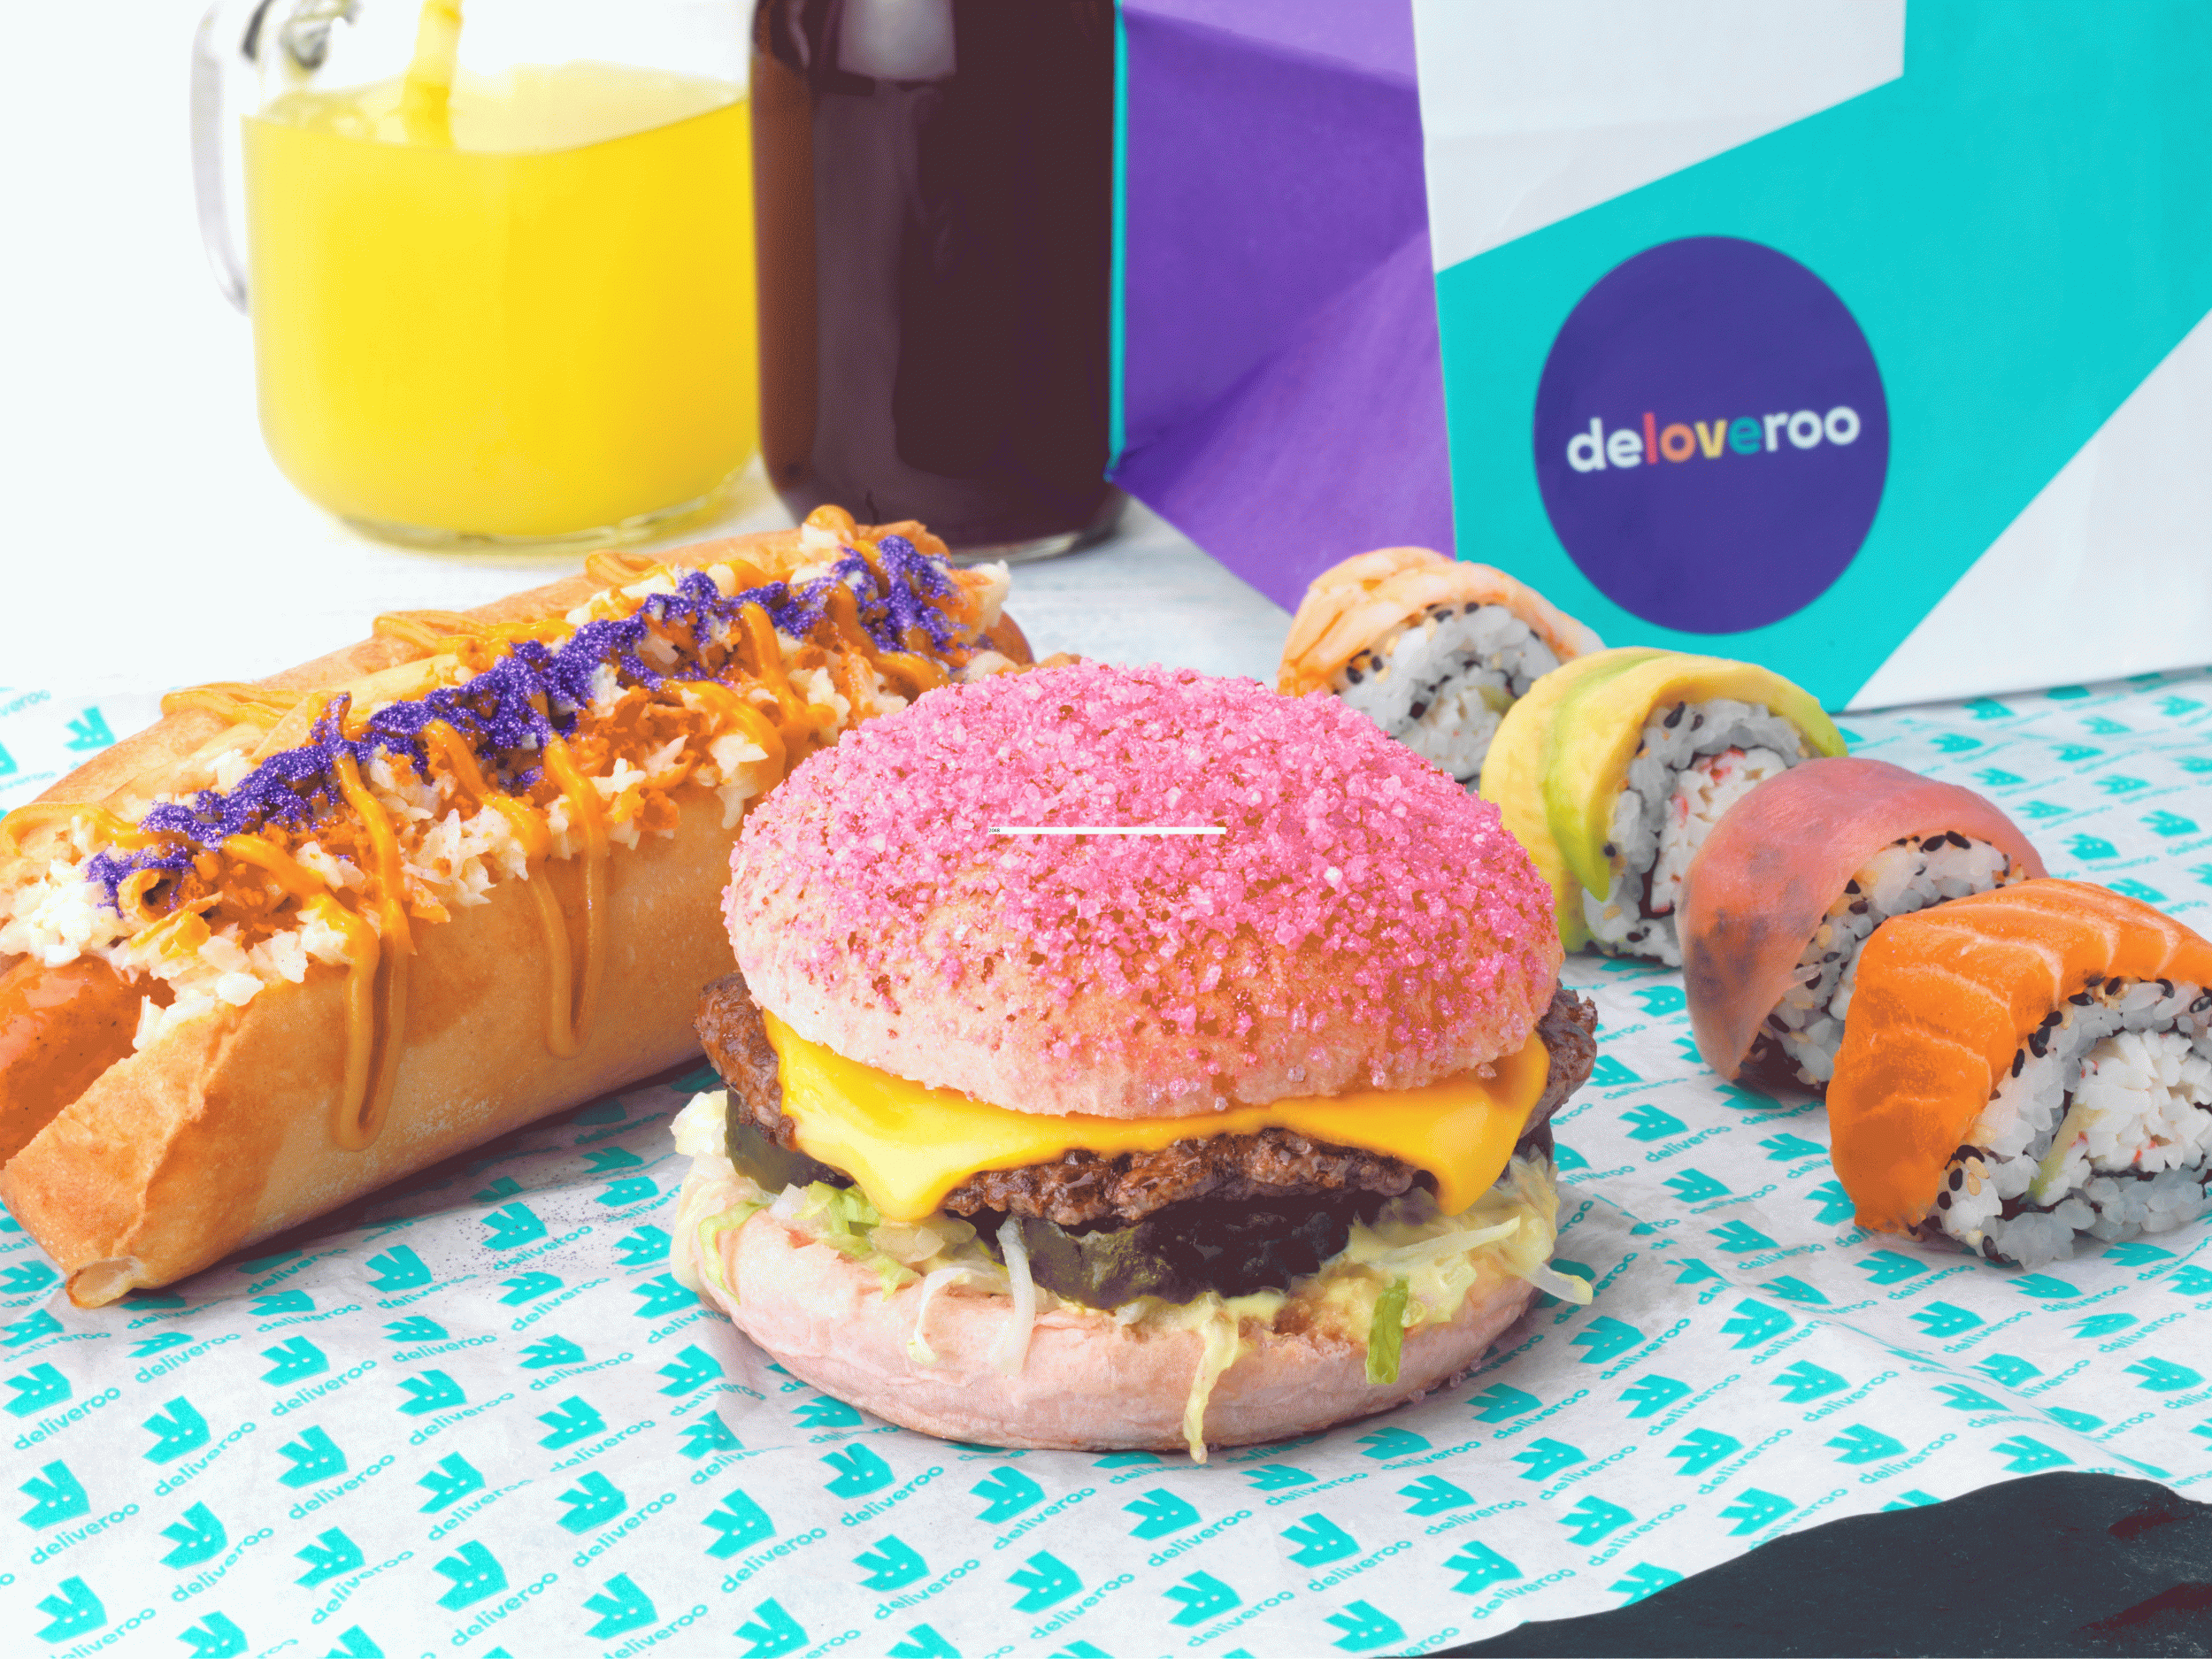 . Many of the dishes promoted by Deliveroo will be available for sale in Trafalgar Square on 8 July